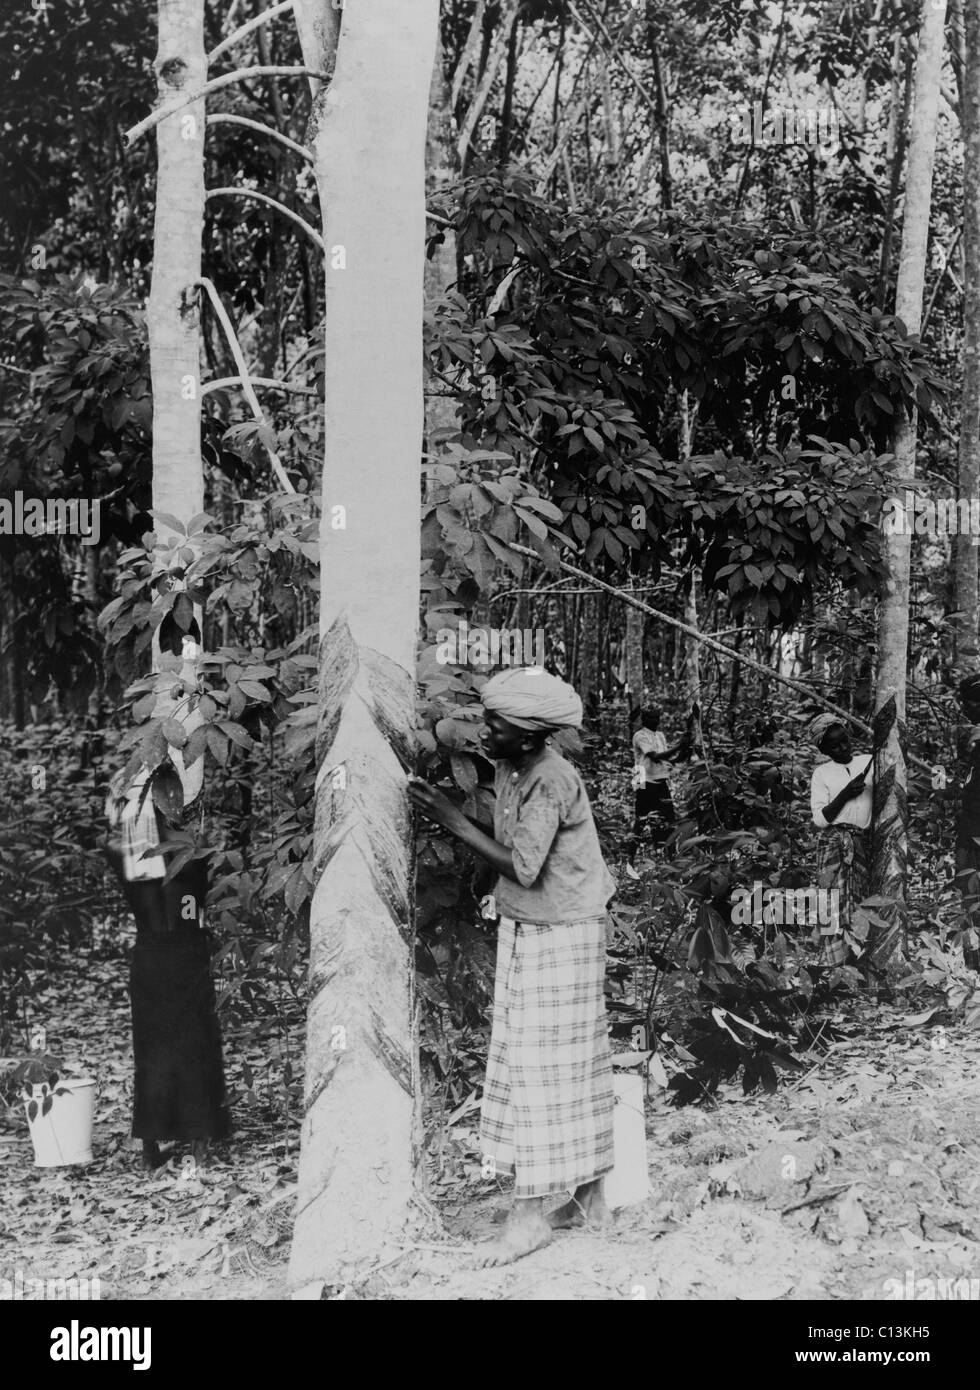 Gathering rubber sap. The rubber plants responds to cutting with a protective secretion of latex, which hardens into gum rubber. Java, Indonesia, ca. 1910. Stock Photo